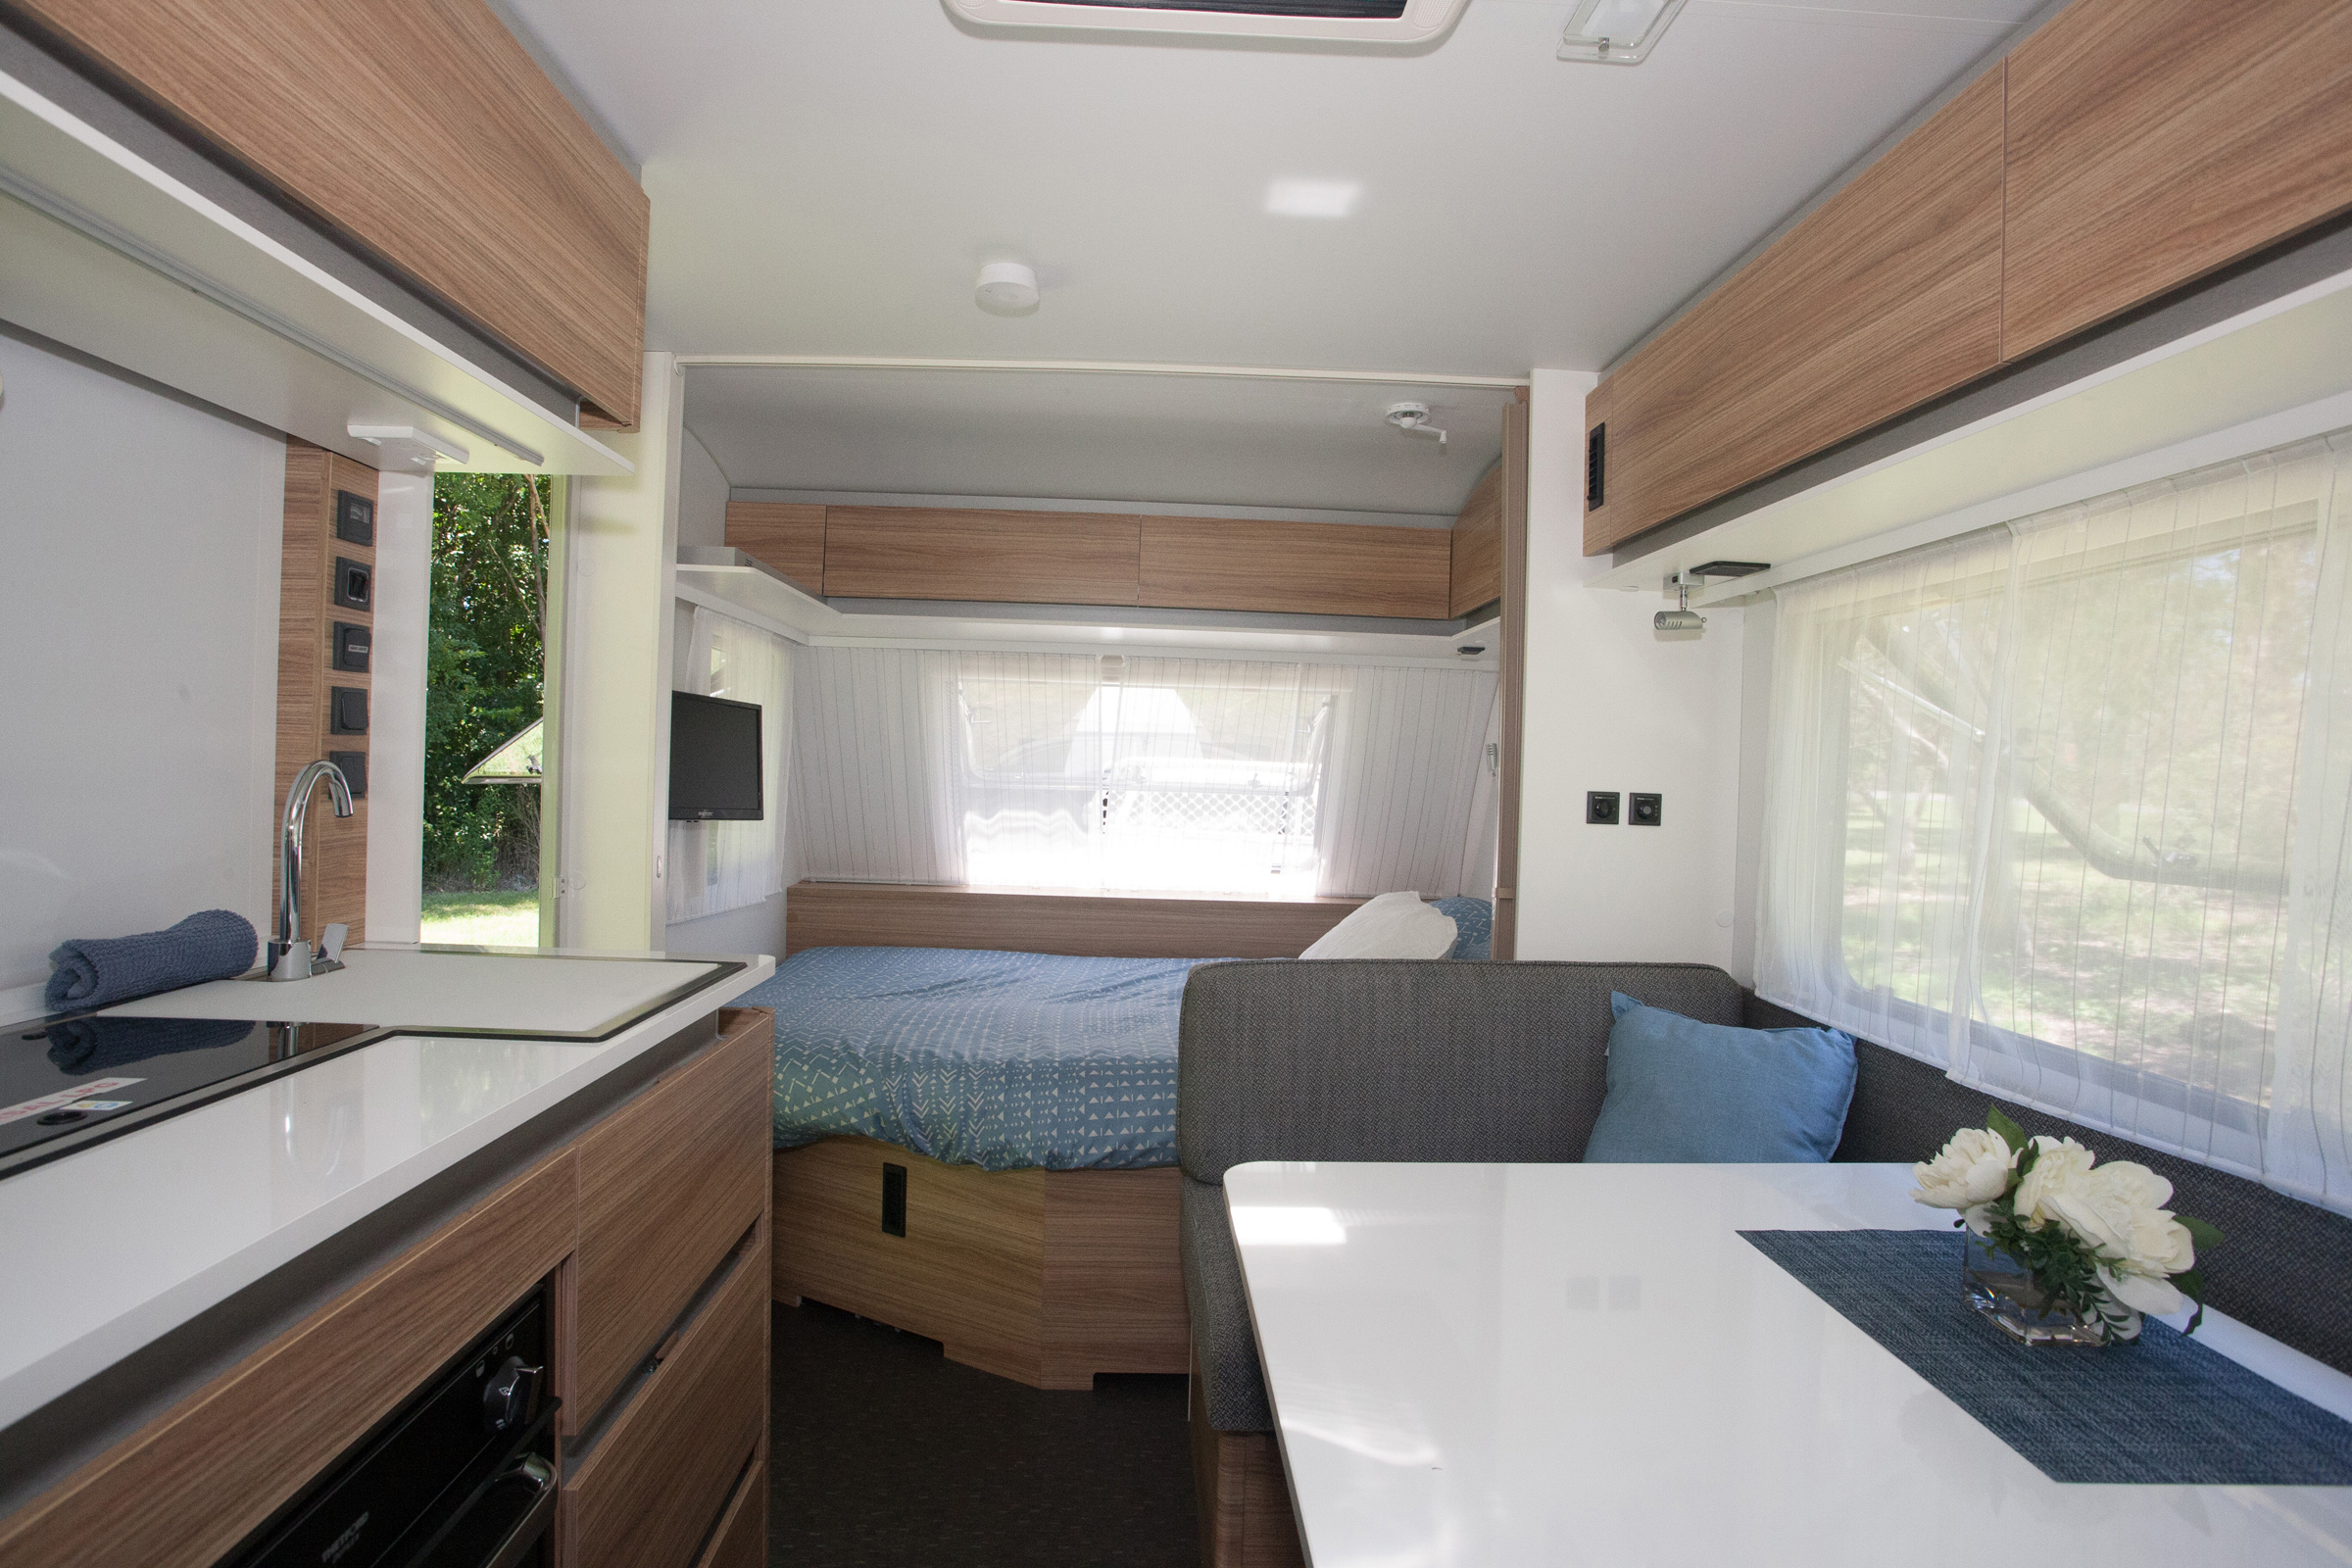 Timber accents throughout the van give it a different look